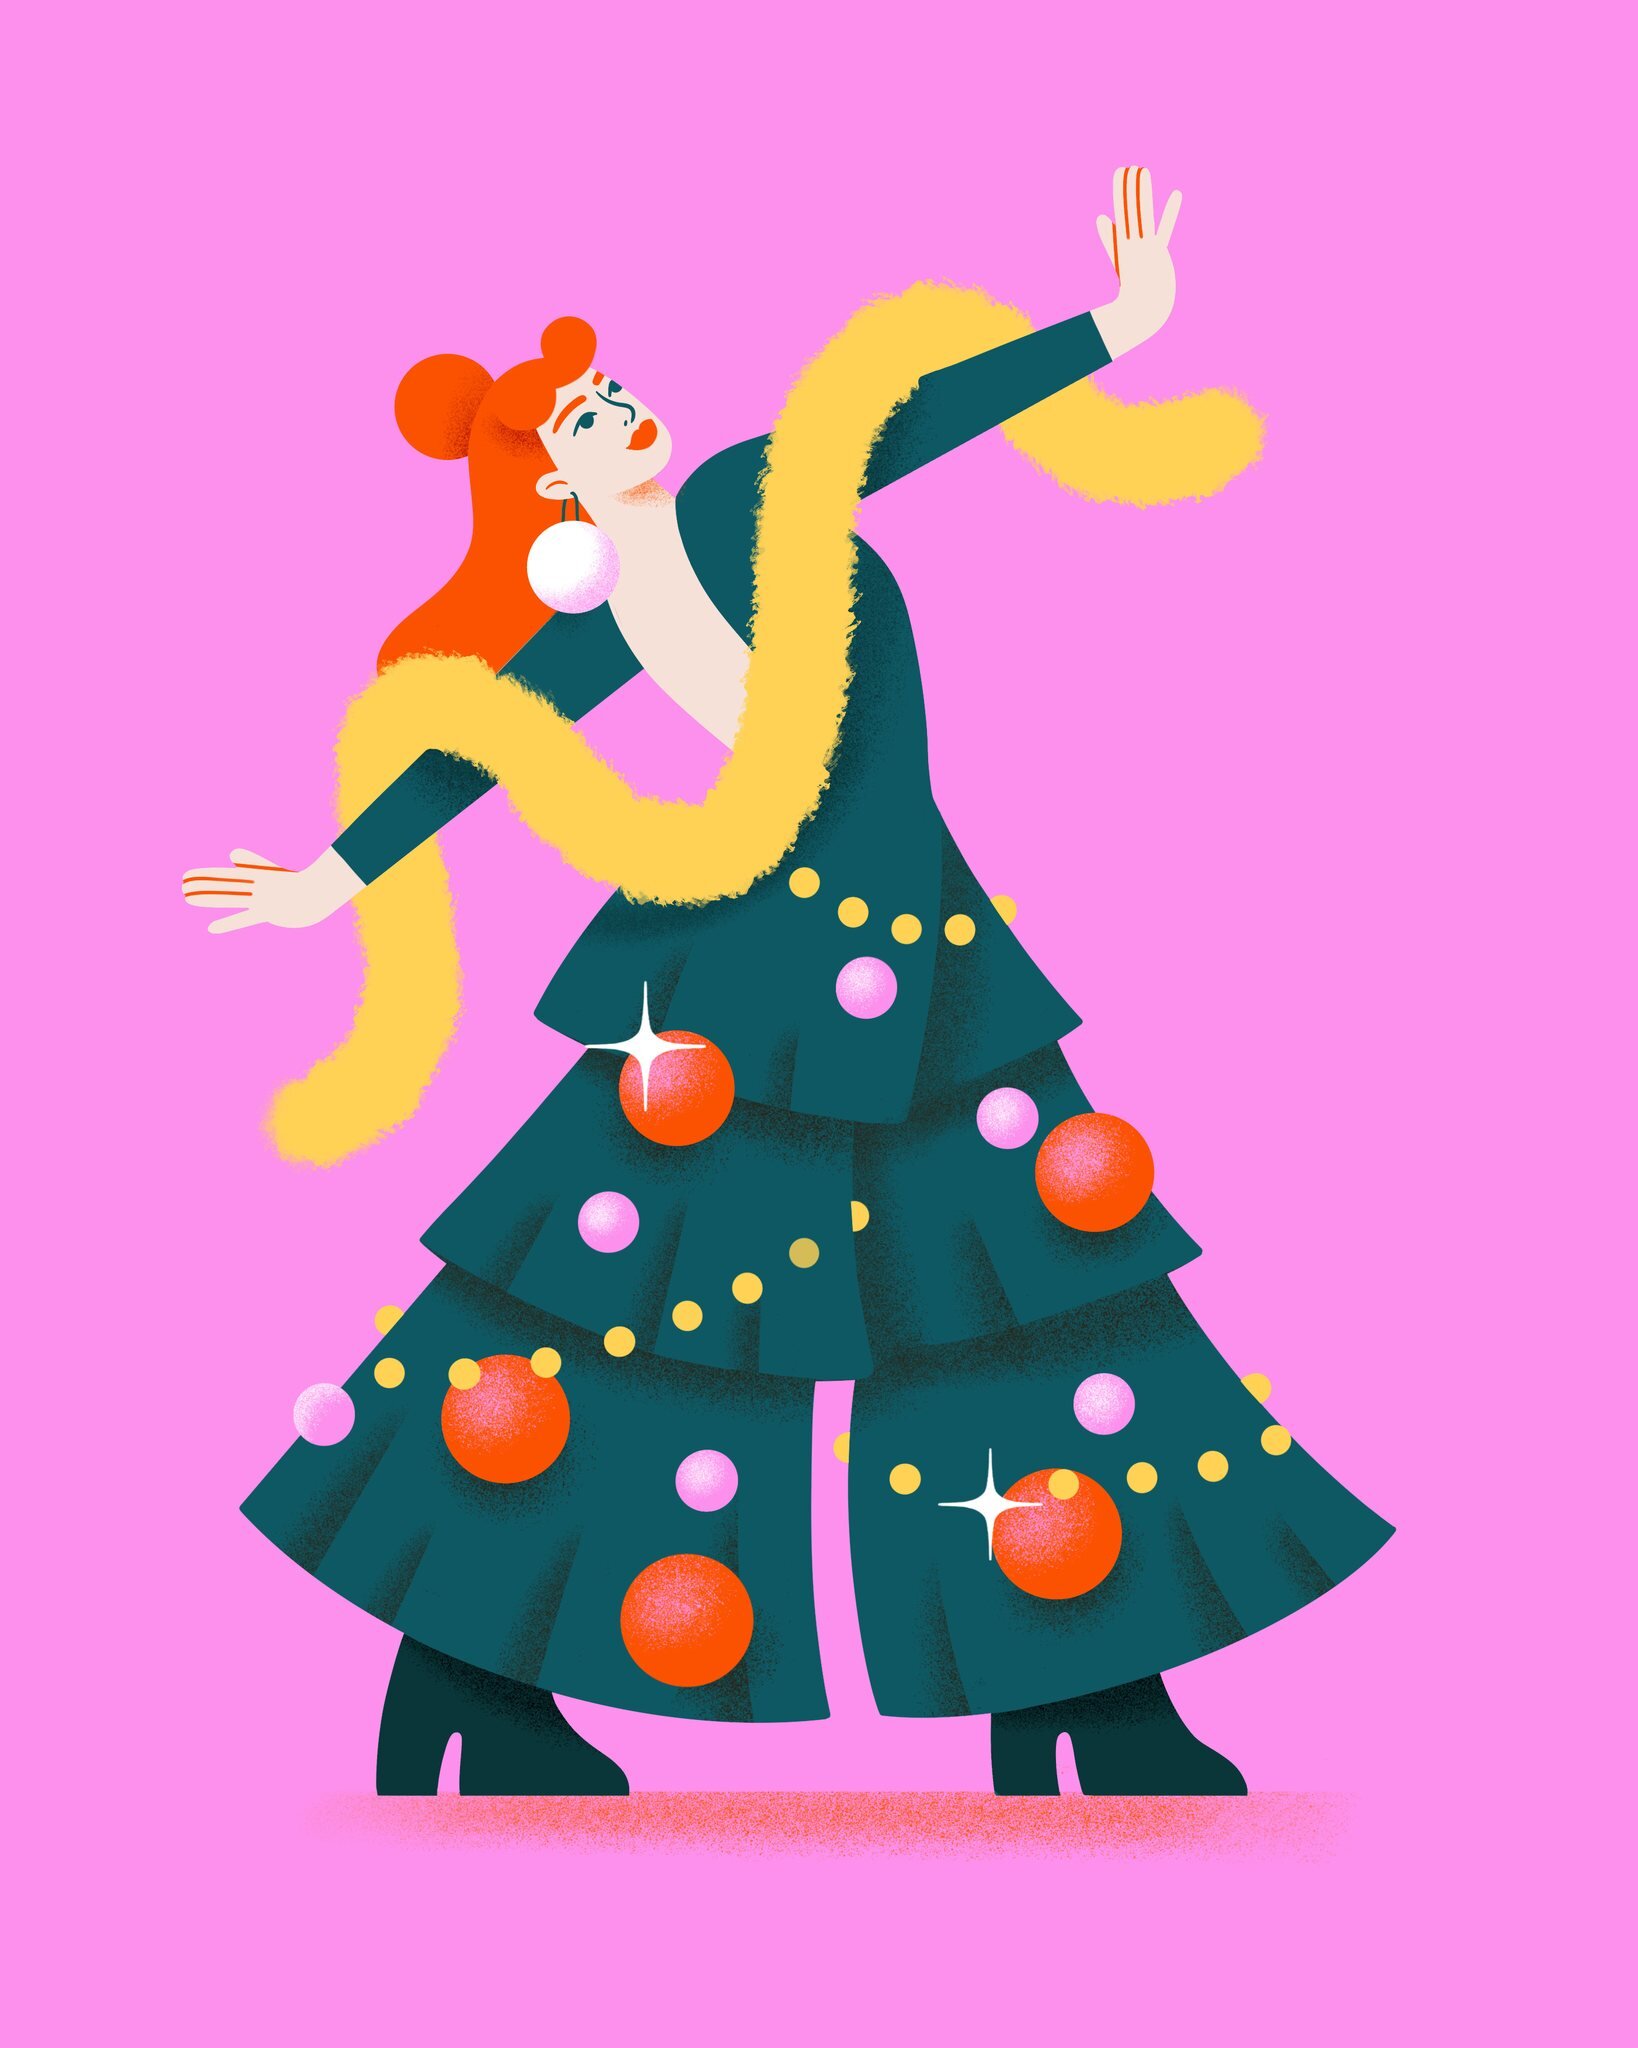 Dancing into Third Advent 🕯🕯🕯 One week to go! 🎄

.
.
.

 #dancingqueen #christmasdance #christmastree #illustrationoftheday #illustrationartists #boldcolors